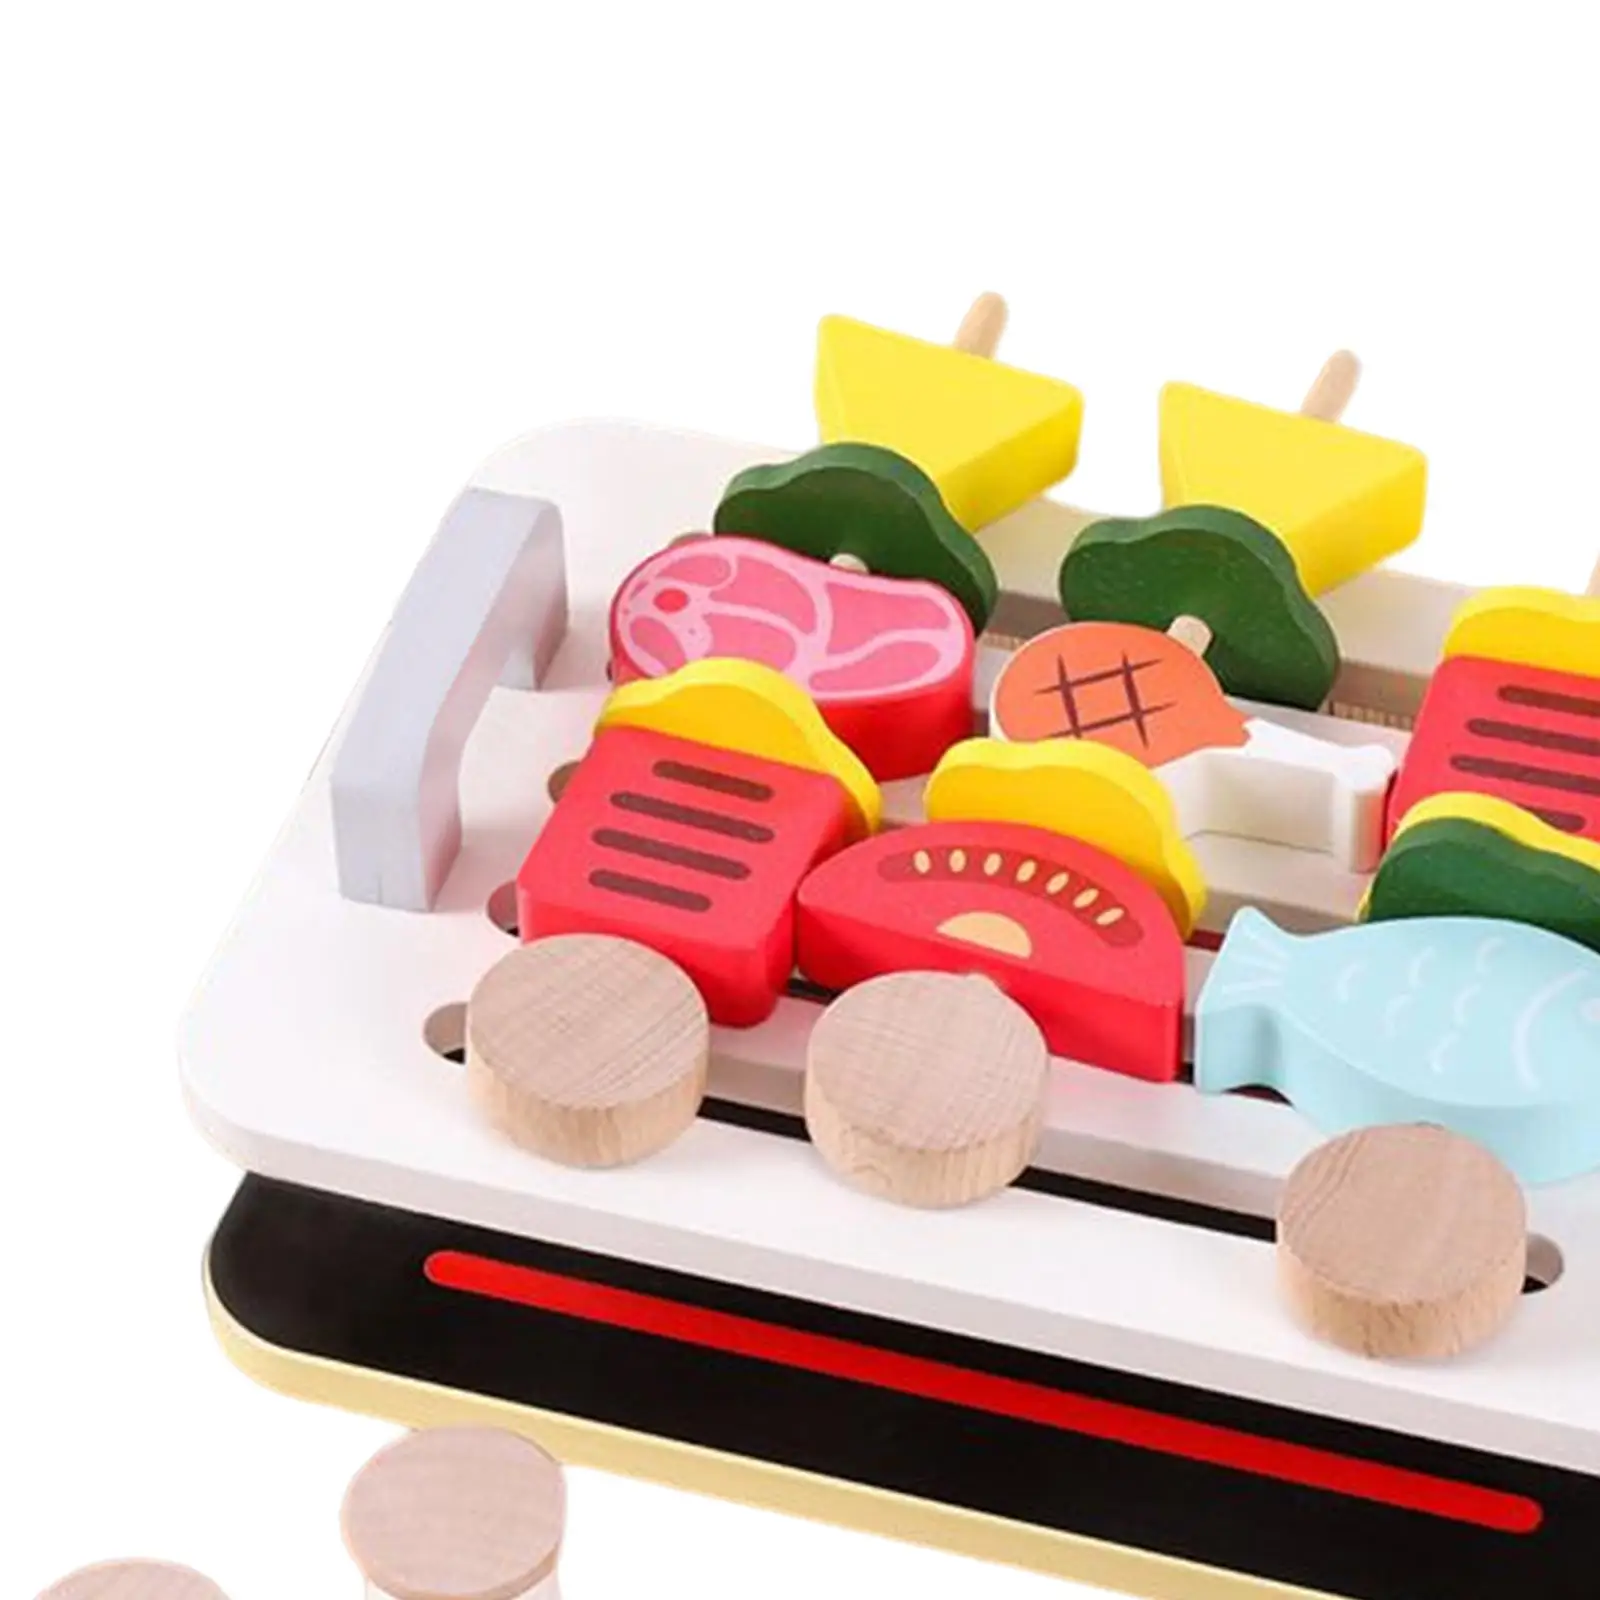 

Montessori Wooden Barbecue Playset Educational Kitchen Toys Hands On Ability Food Pretend Playset for Preschool Kids Boys Gifts